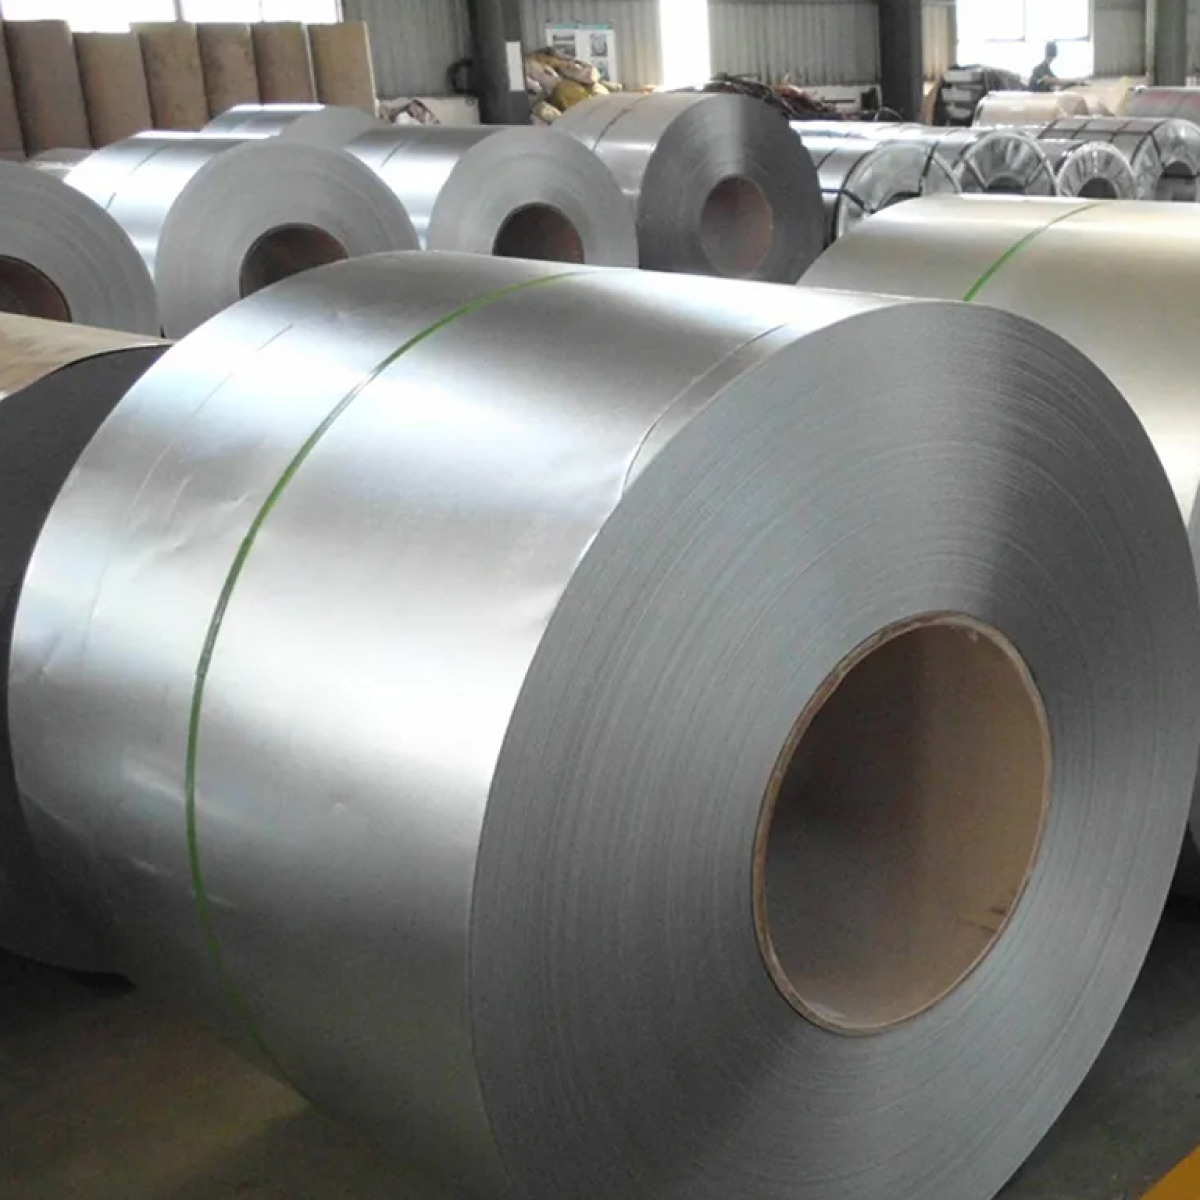 cold rolled coil cold rolled coil steel prices cold rolled steel coil cold rolled coil suppliers wholesale cold rolled carbon steel coil